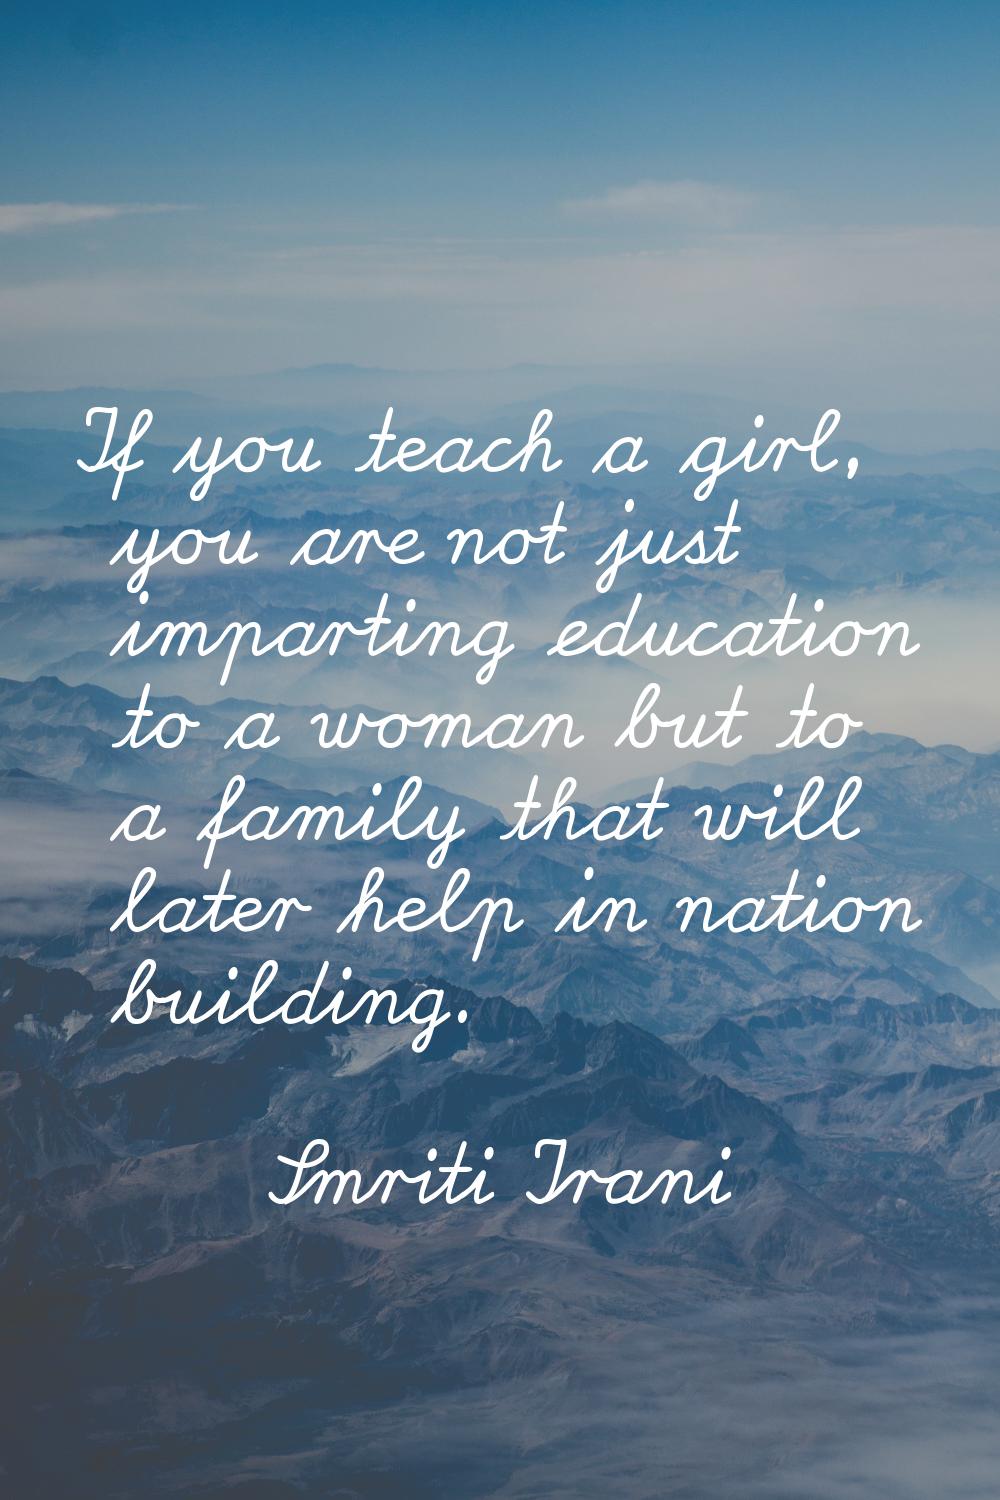 If you teach a girl, you are not just imparting education to a woman but to a family that will late